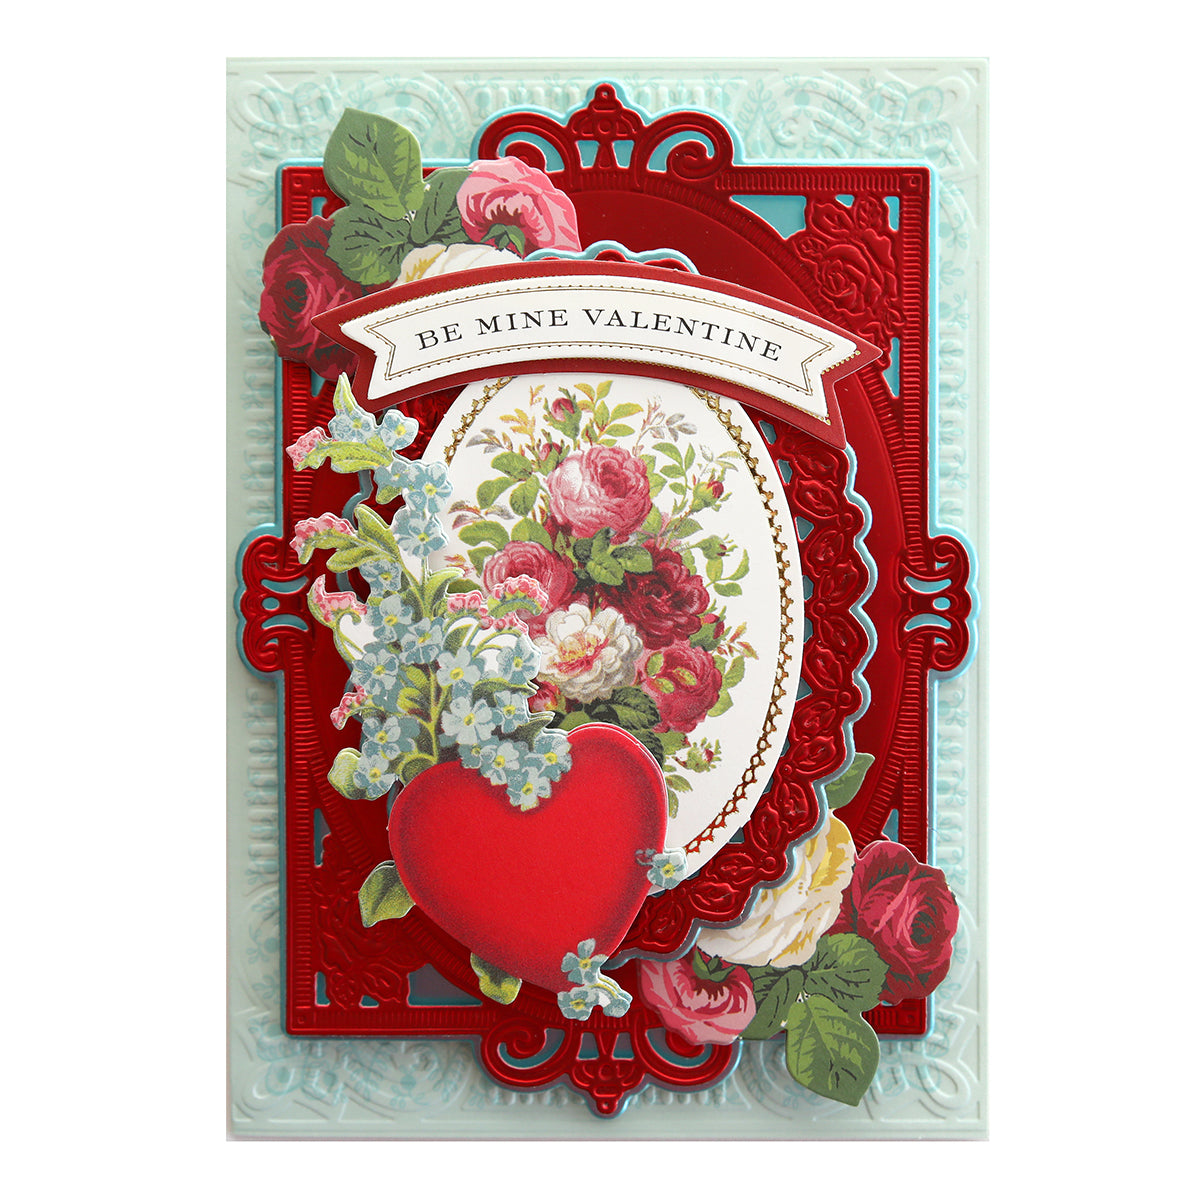 A valentine card with Romantic Stickers and Sentiments, a red heart, and flowers.